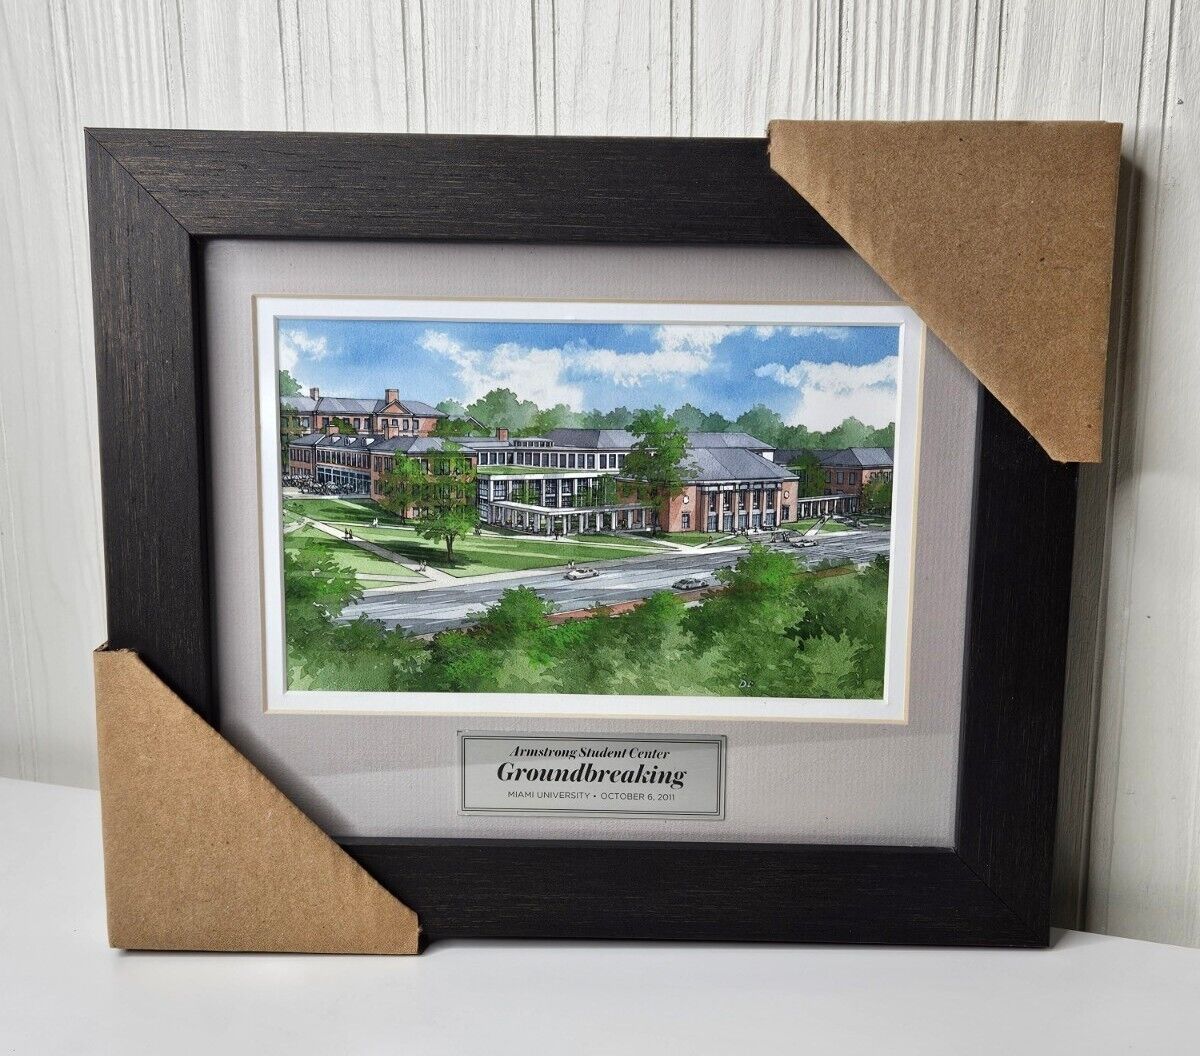 Miami University Picture Framed & Matted Armstrong Student Center Groundbreaking